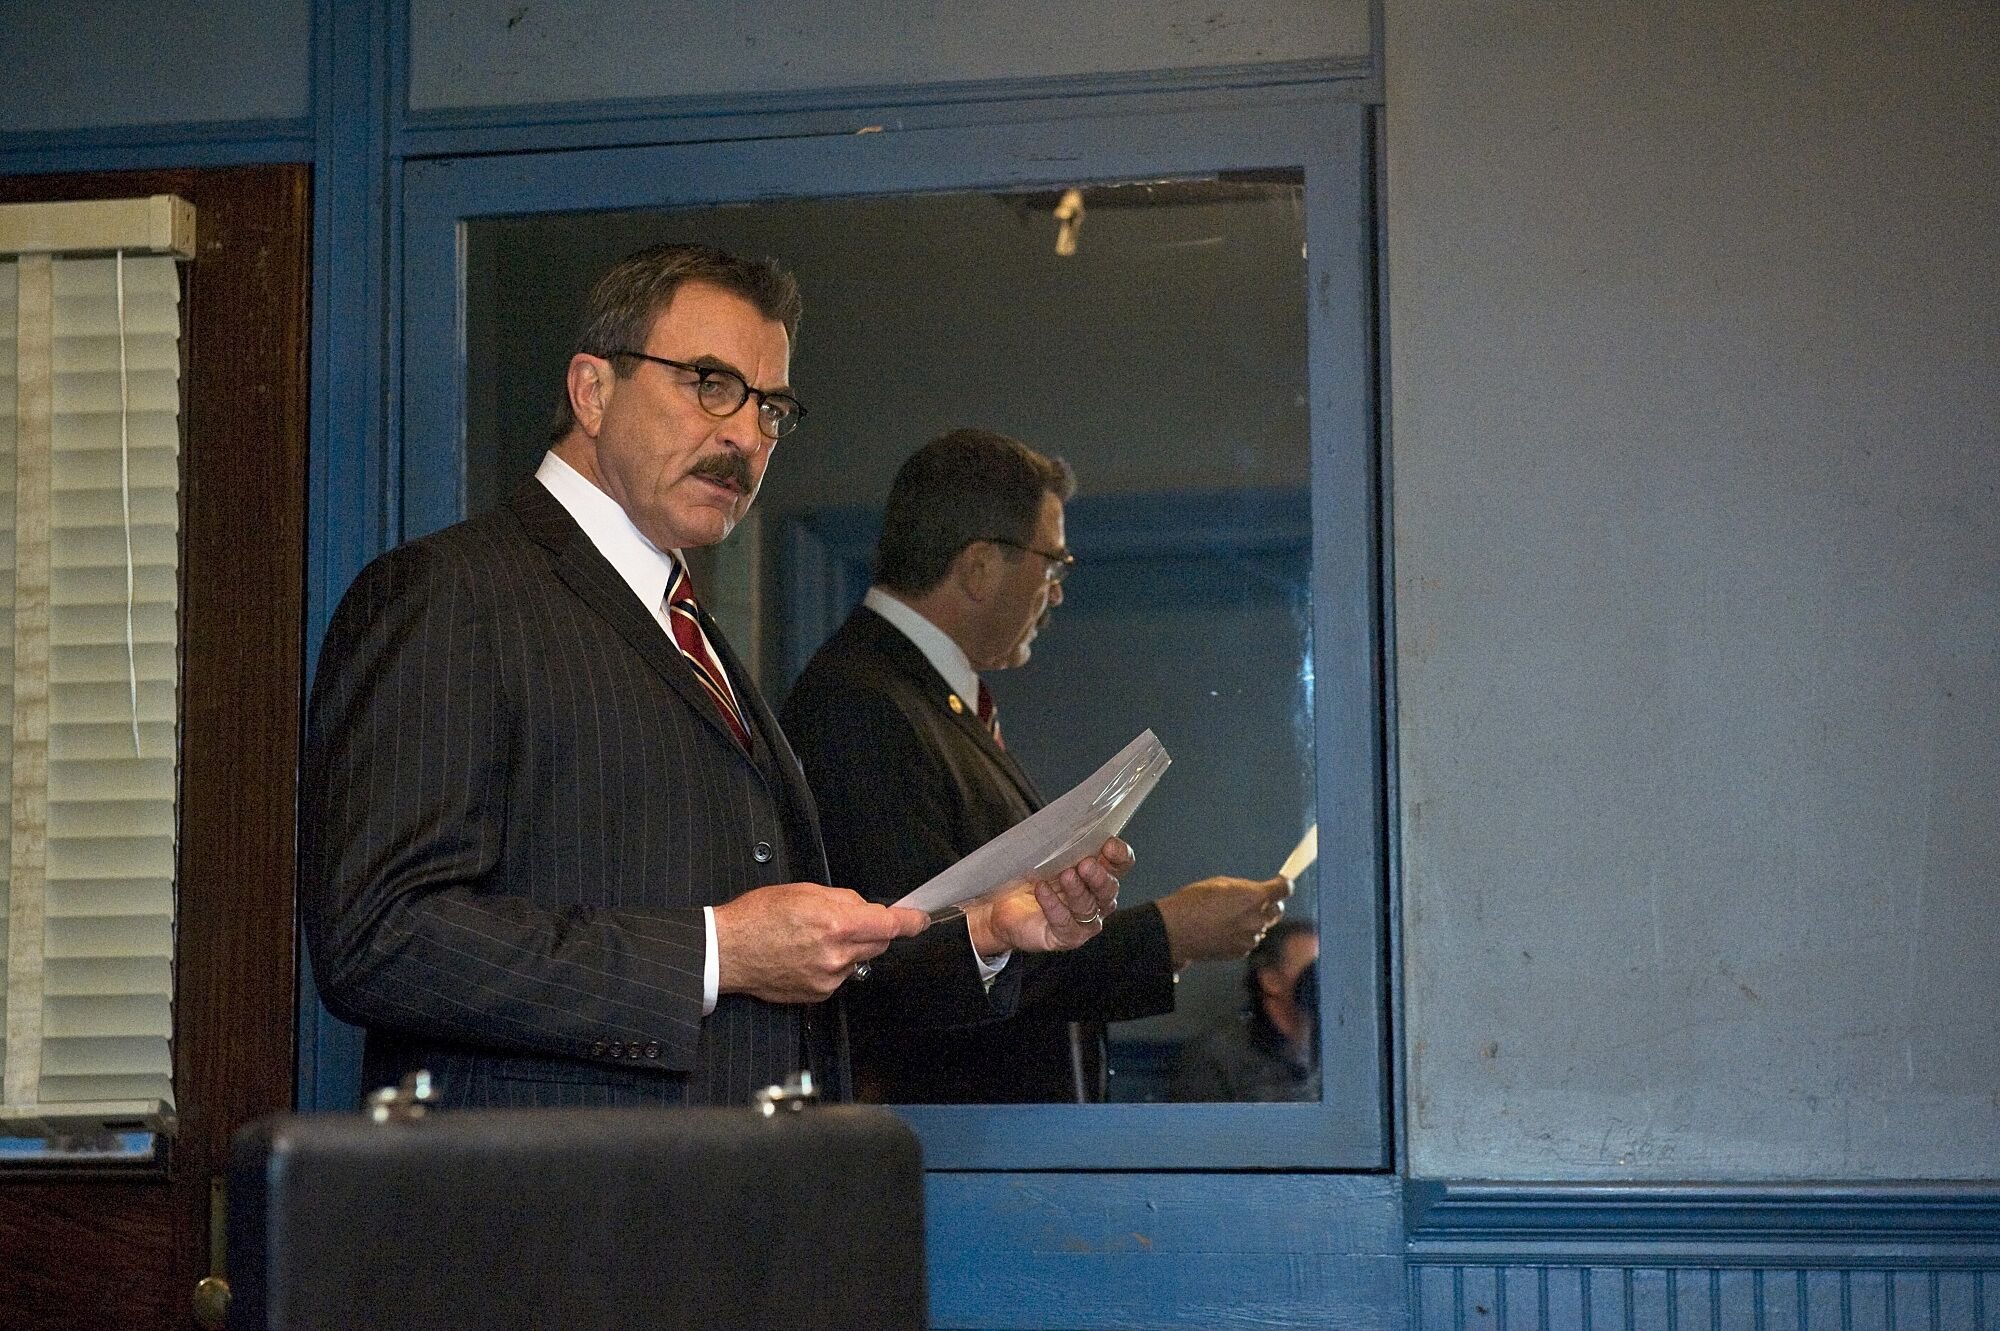 Tom Selleck as Frank Reagan in the hit series "Blue Bloods" | Source: Getty Images